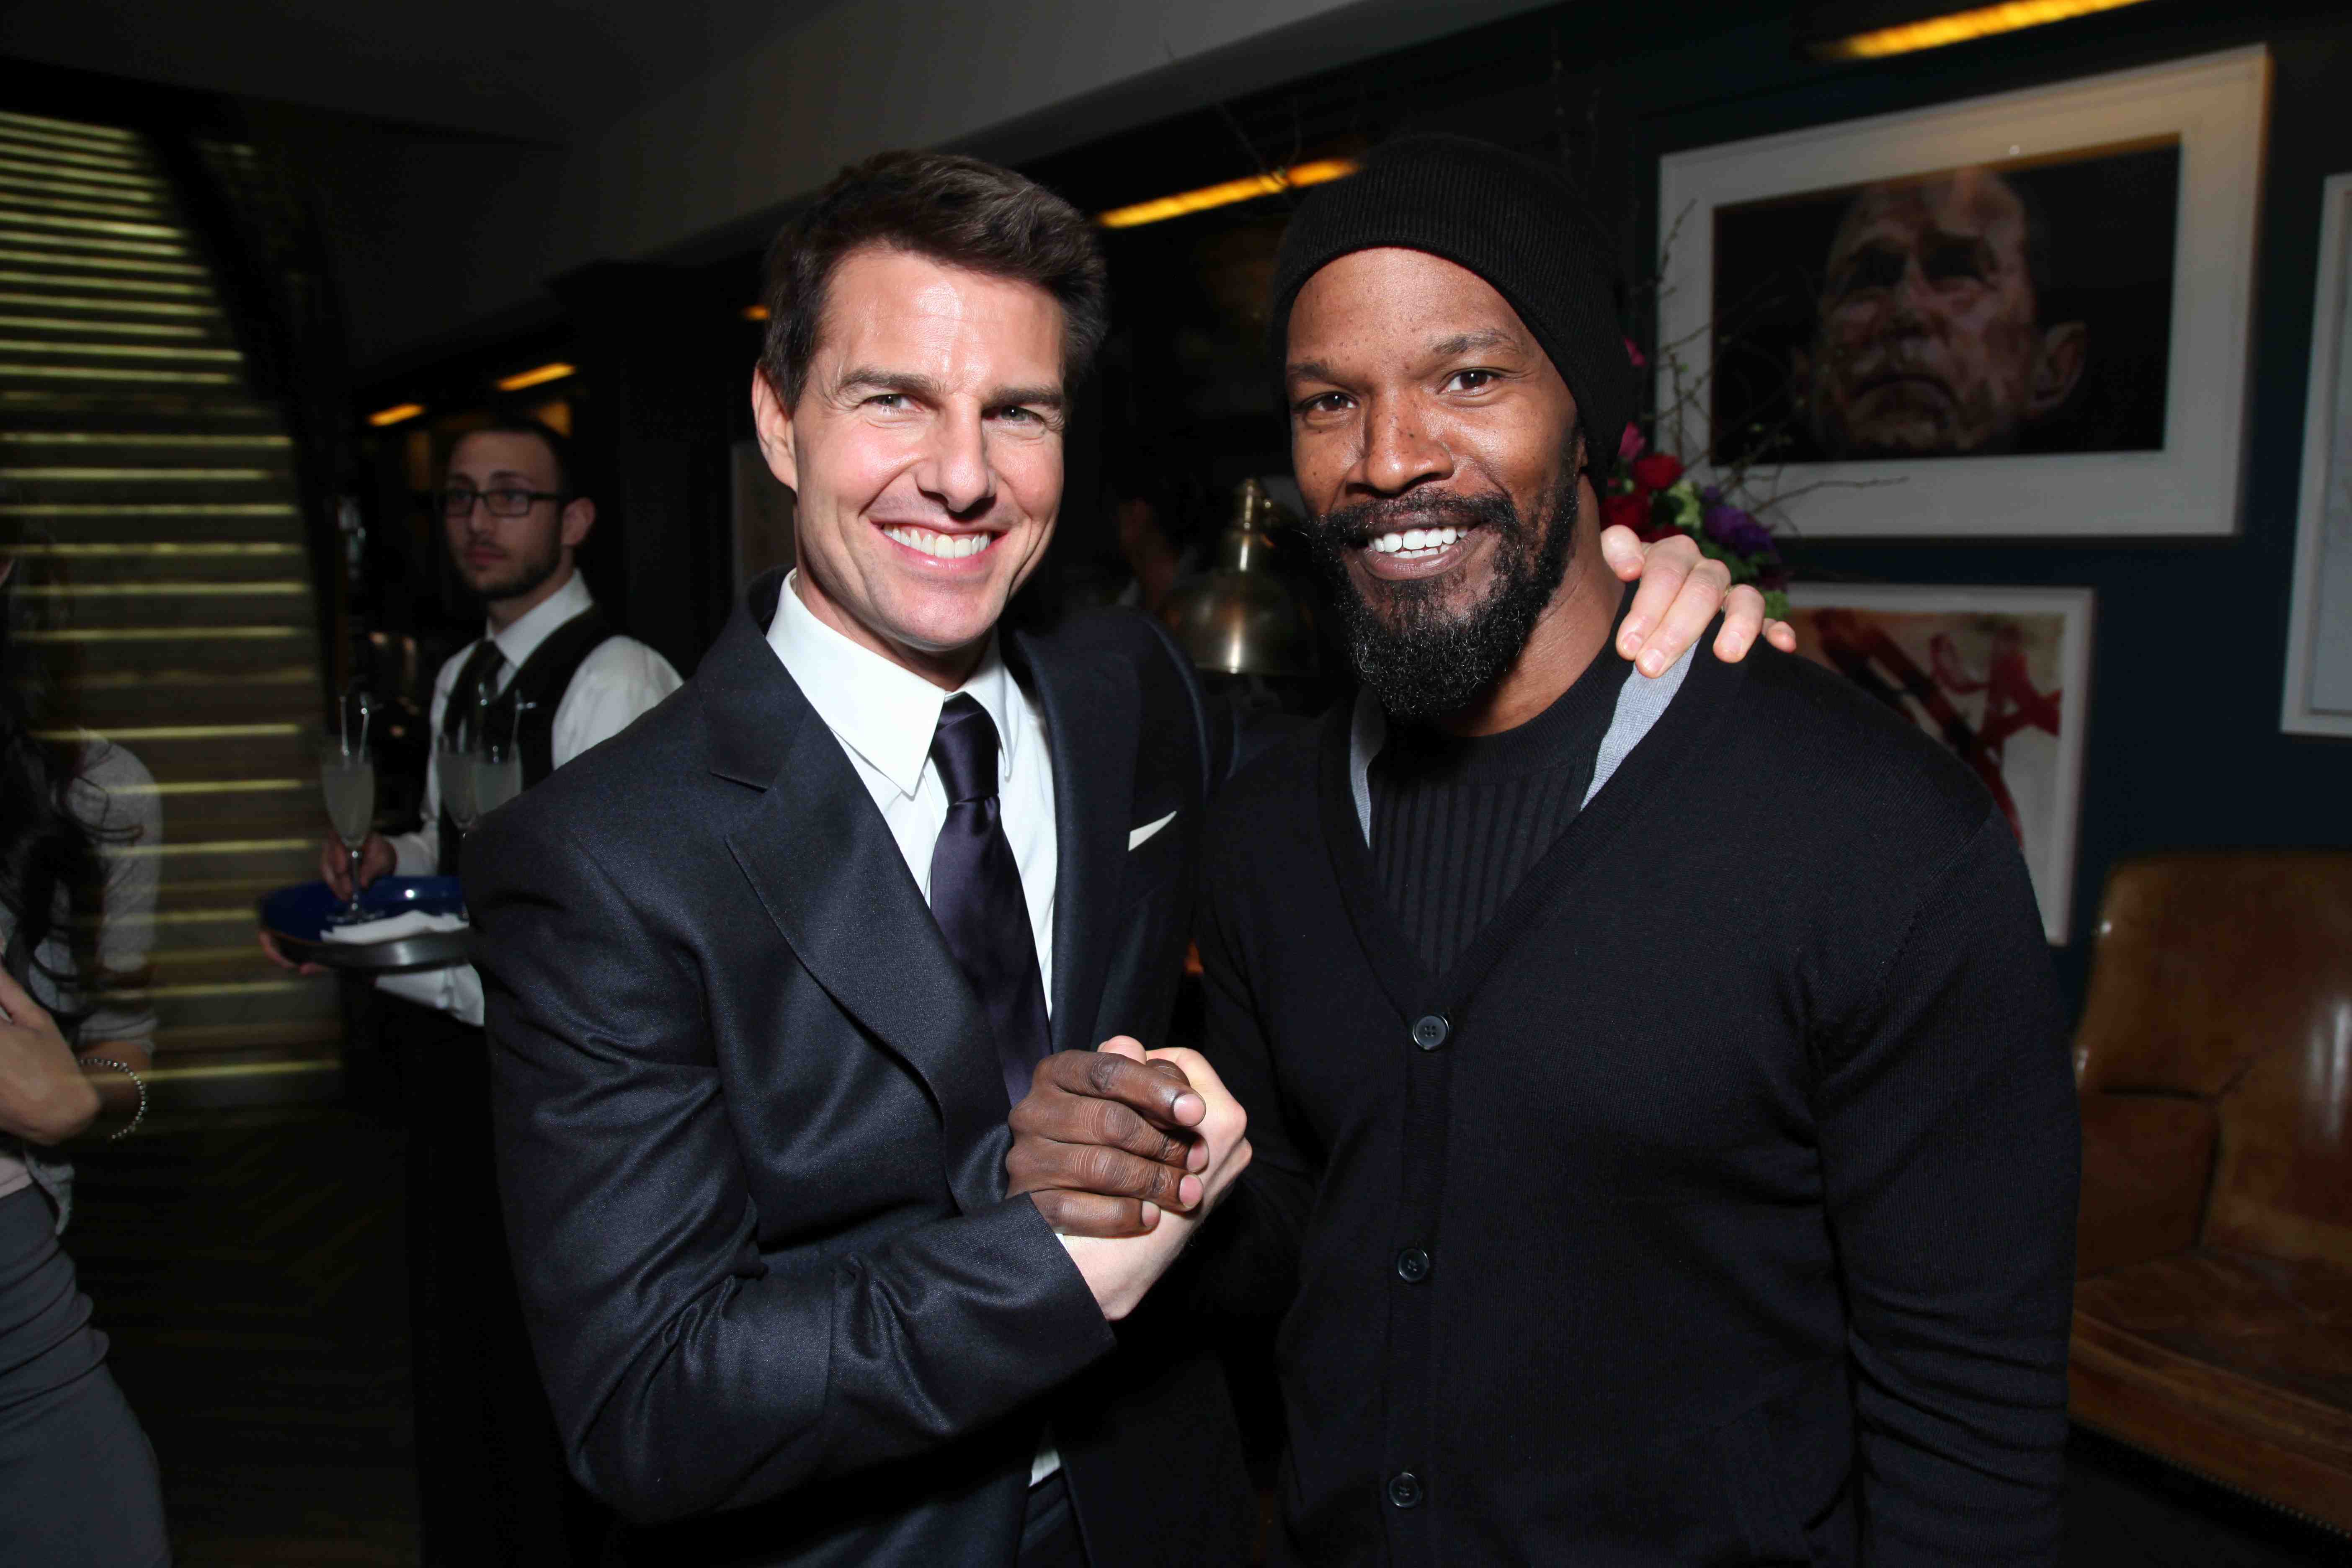 Tom Cruise and Jamie Foxx pose as CAA hosts a Golden Globe pre-party in Hollywood, CA on Friday, January 13, 2012. (Alex J. Berliner/abimages)